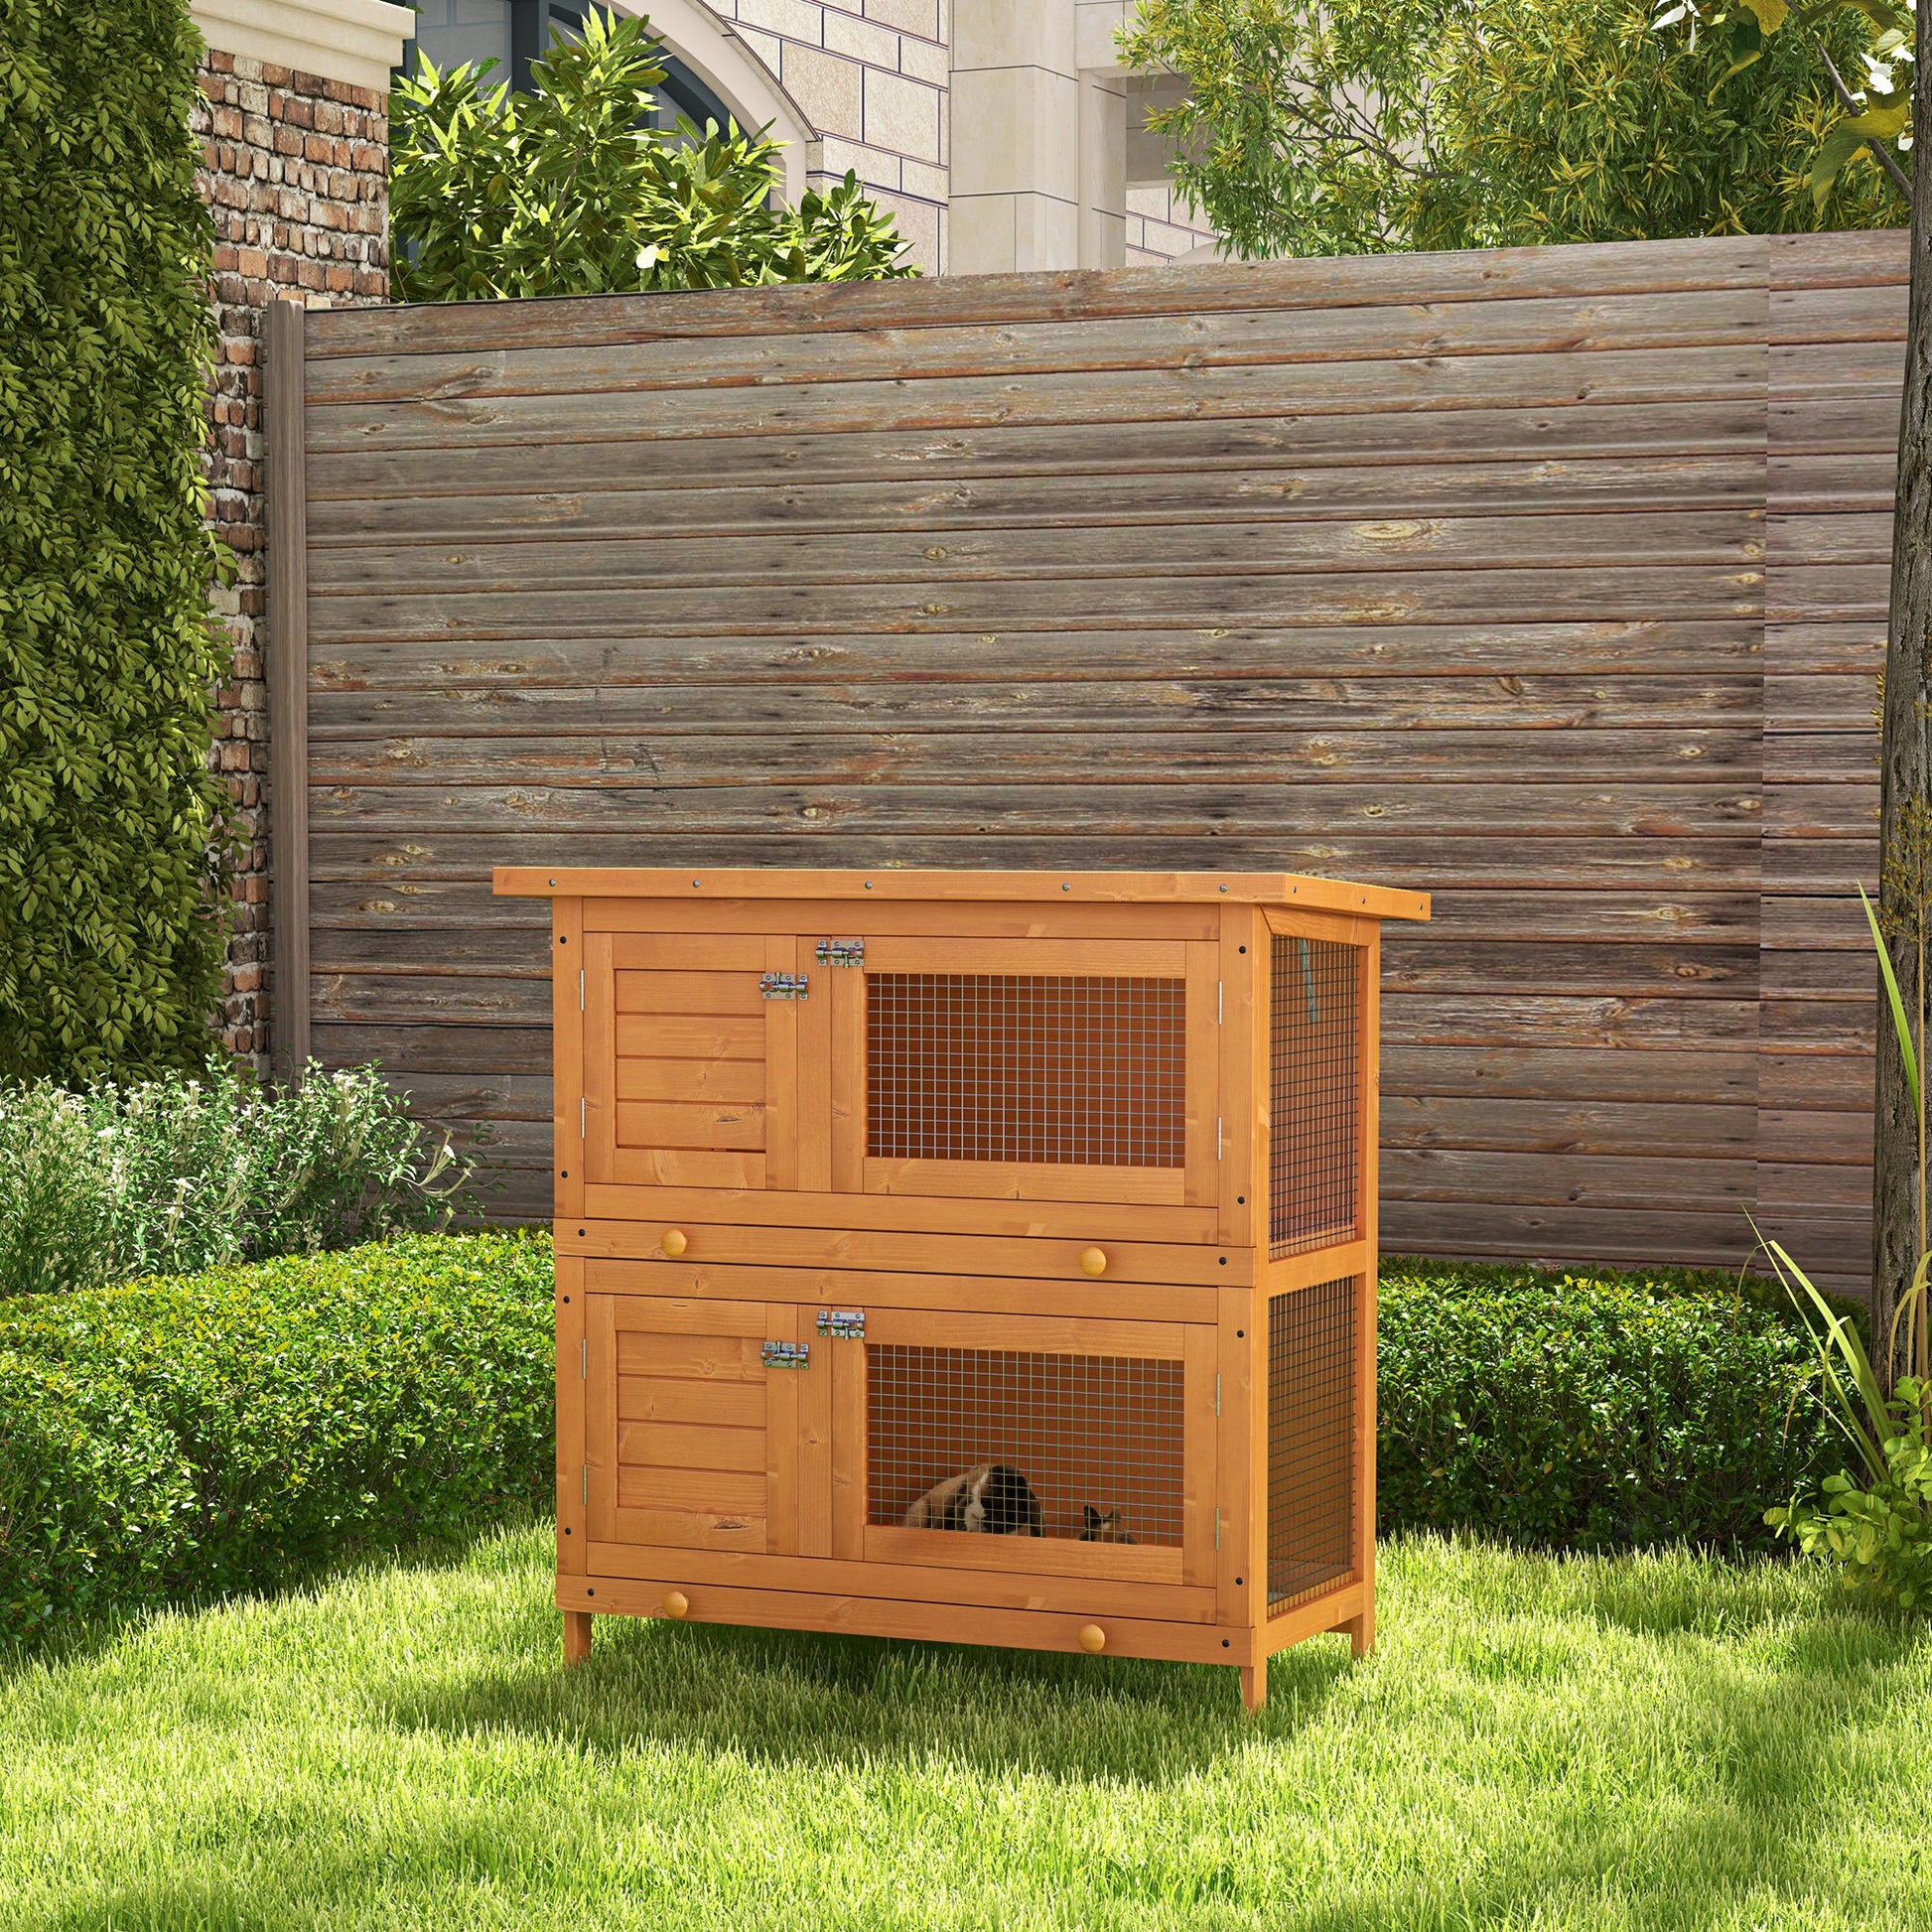 Wooden Rabbit Hutch, 2 Tiers Bunny House, Rabbit Cage w/ Slide-Out Tray, Small Animal House, Pawhut, 2